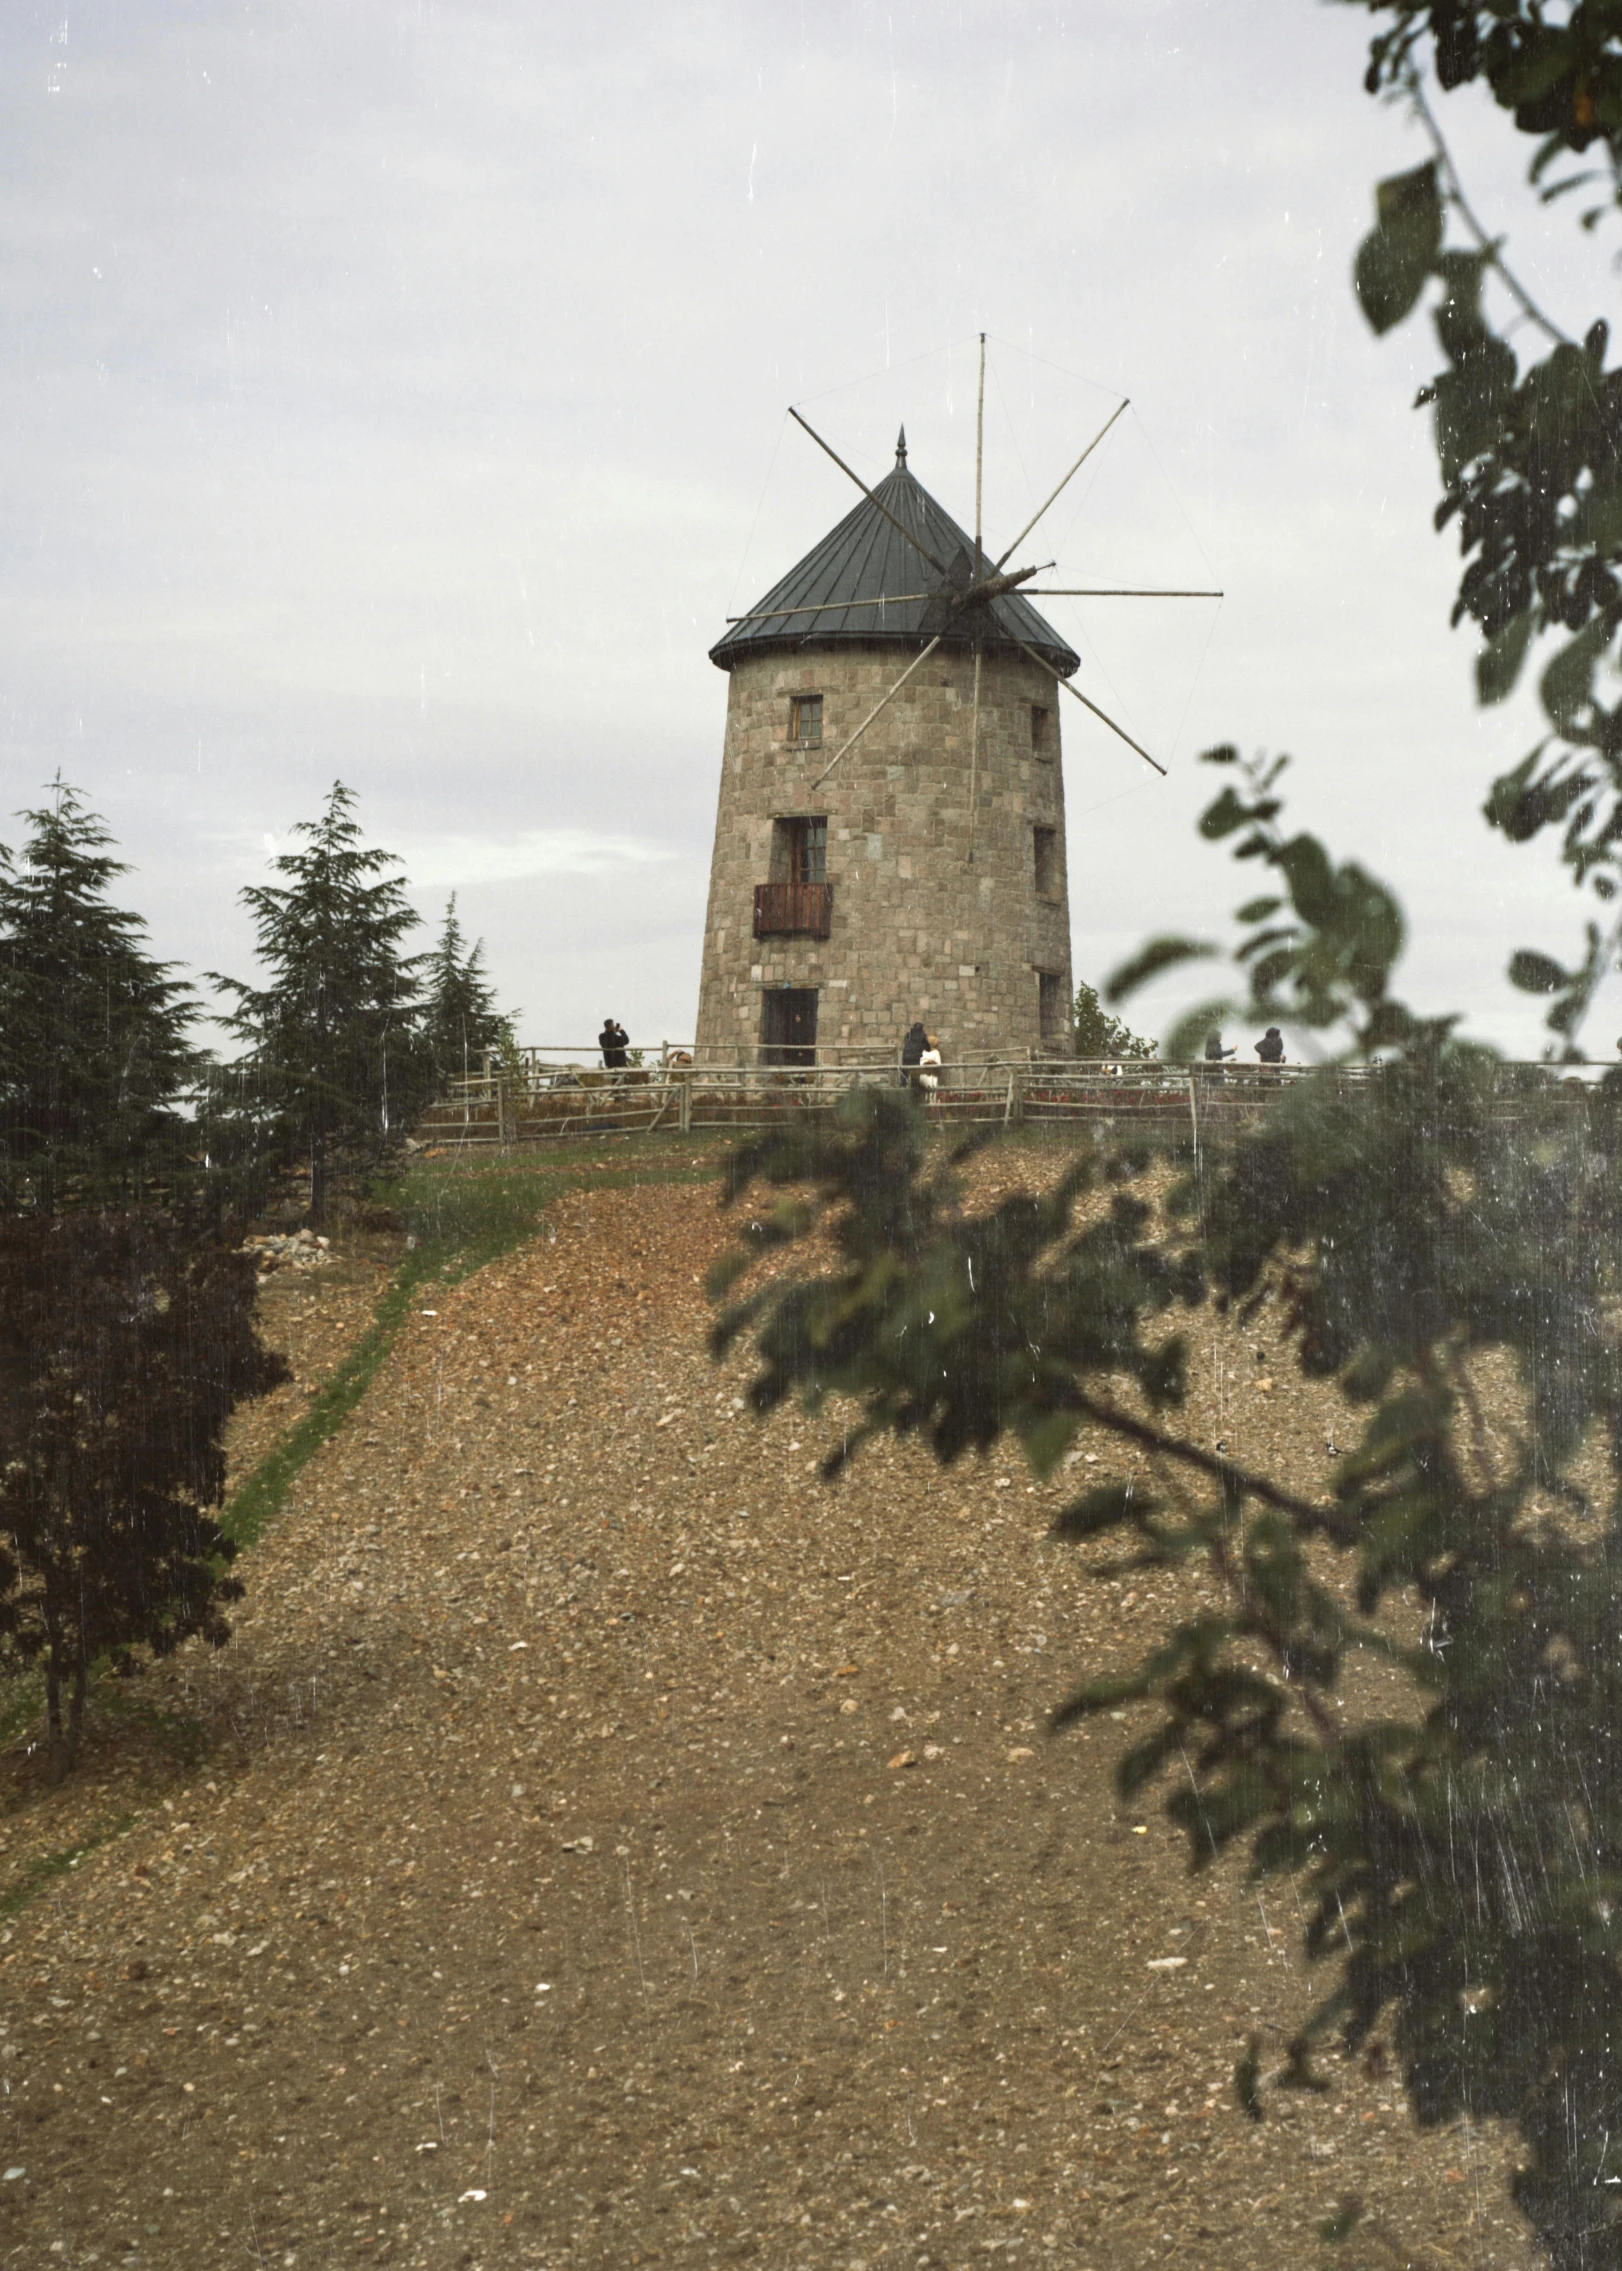 a tower on a hill that appears to be overcast